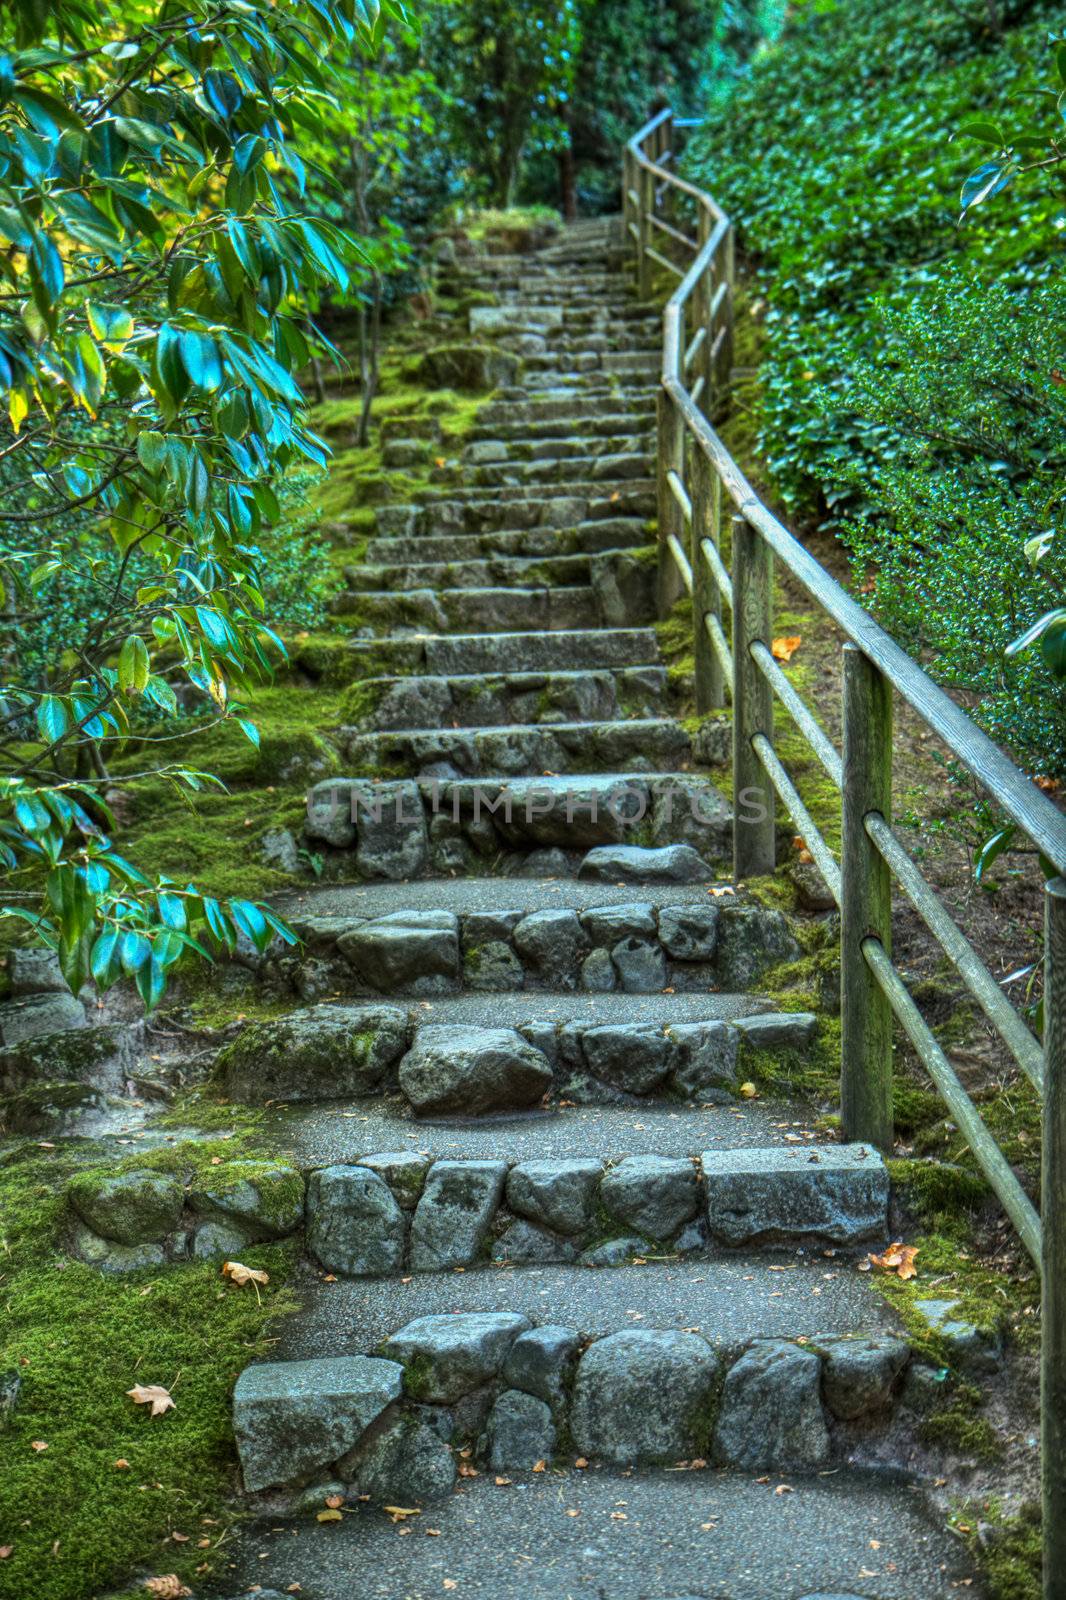 Japanese garden stone staircase HDR by bobkeenan